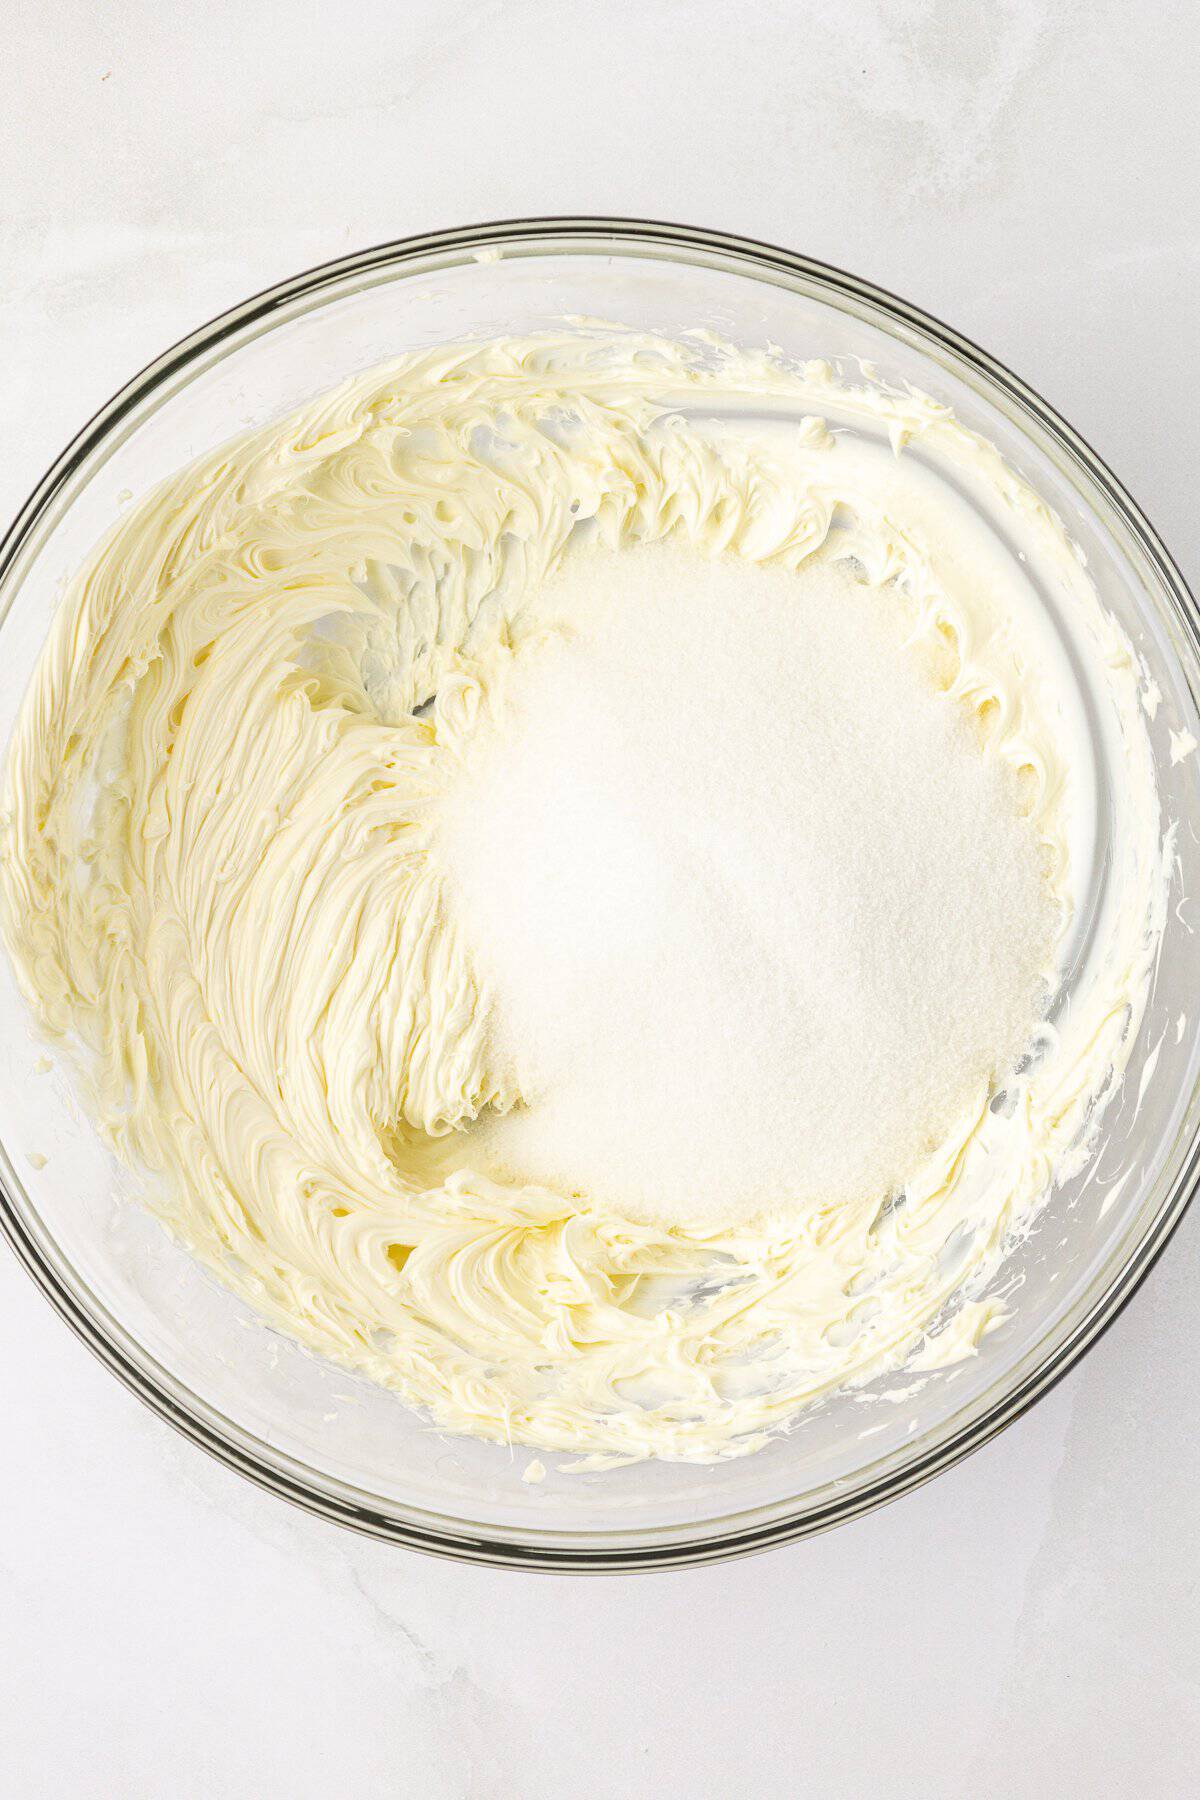 butter creamed in a clear glass bowl with granulated sugar on top